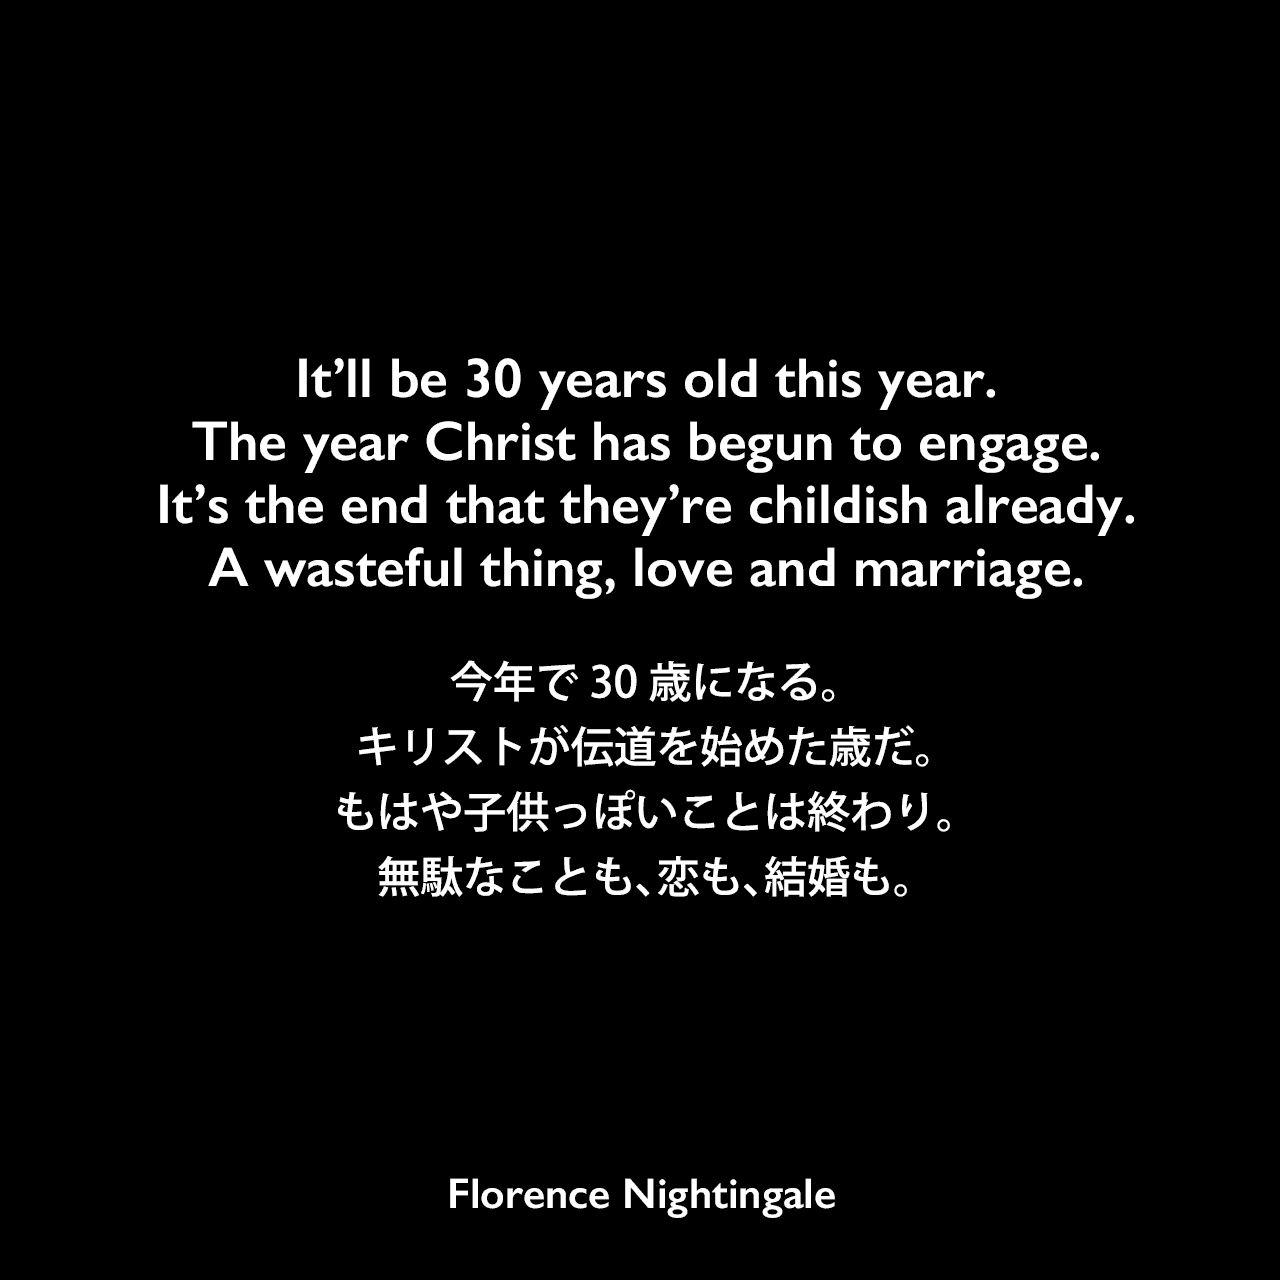 It’ll be 30 years old this year.The year Christ has begun to engage.It’s the end that they’re childish already.A wasteful thing, love and marriage.今年で30歳になる。キリストが伝道を始めた歳だ。もはや子供っぽいことは終わり。無駄なことも、恋も、結婚も。Florence Nightingale